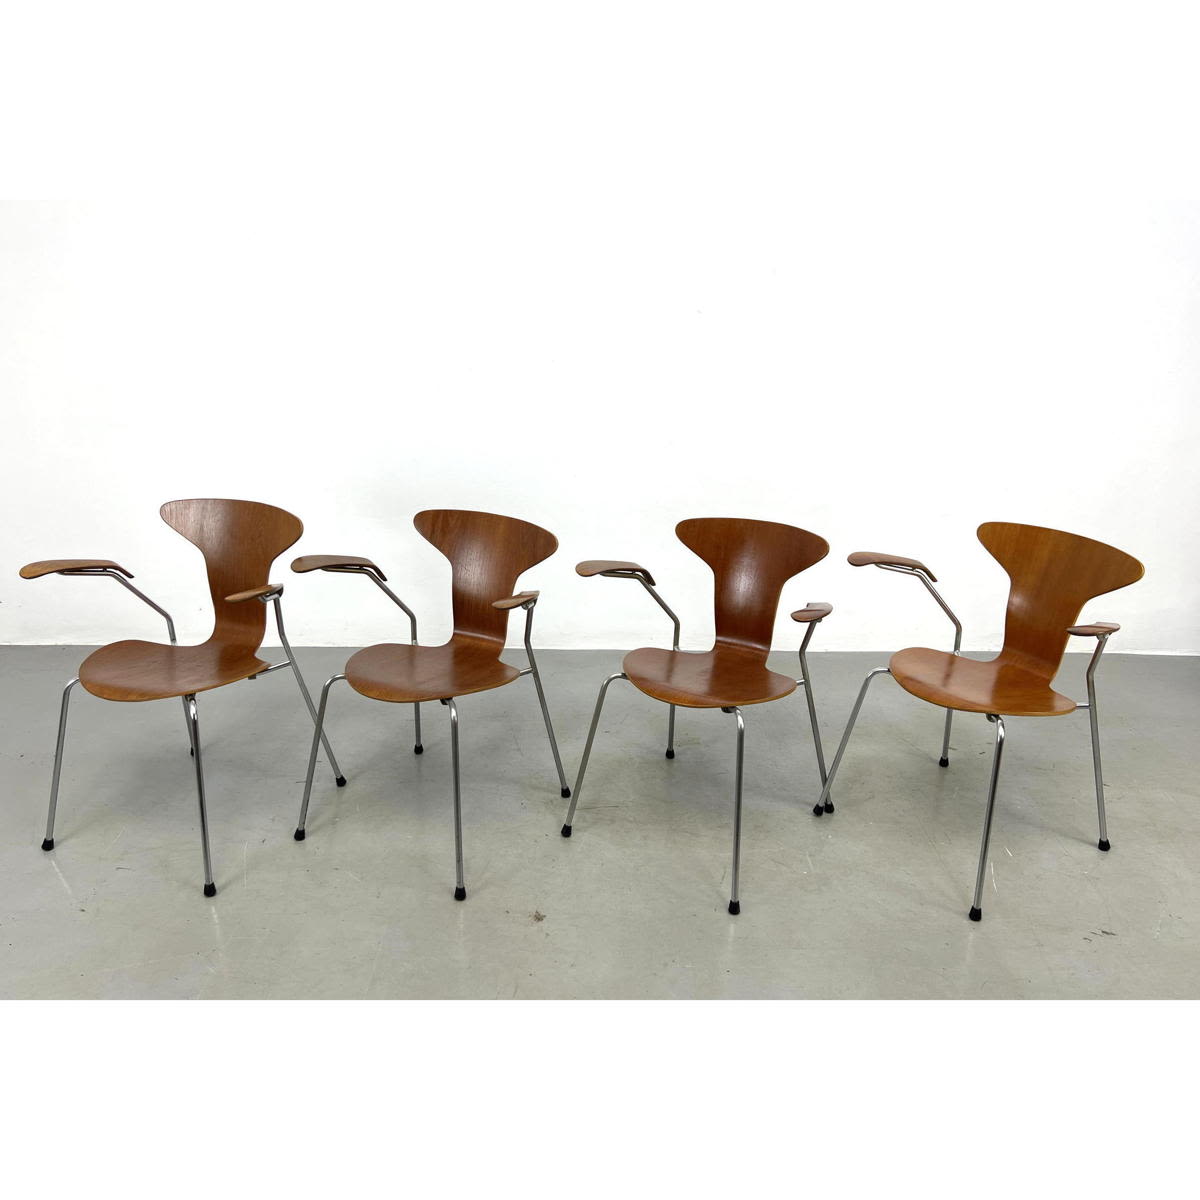 Set 4 Early Arne Jacobsen Arm Chairs  2b8316